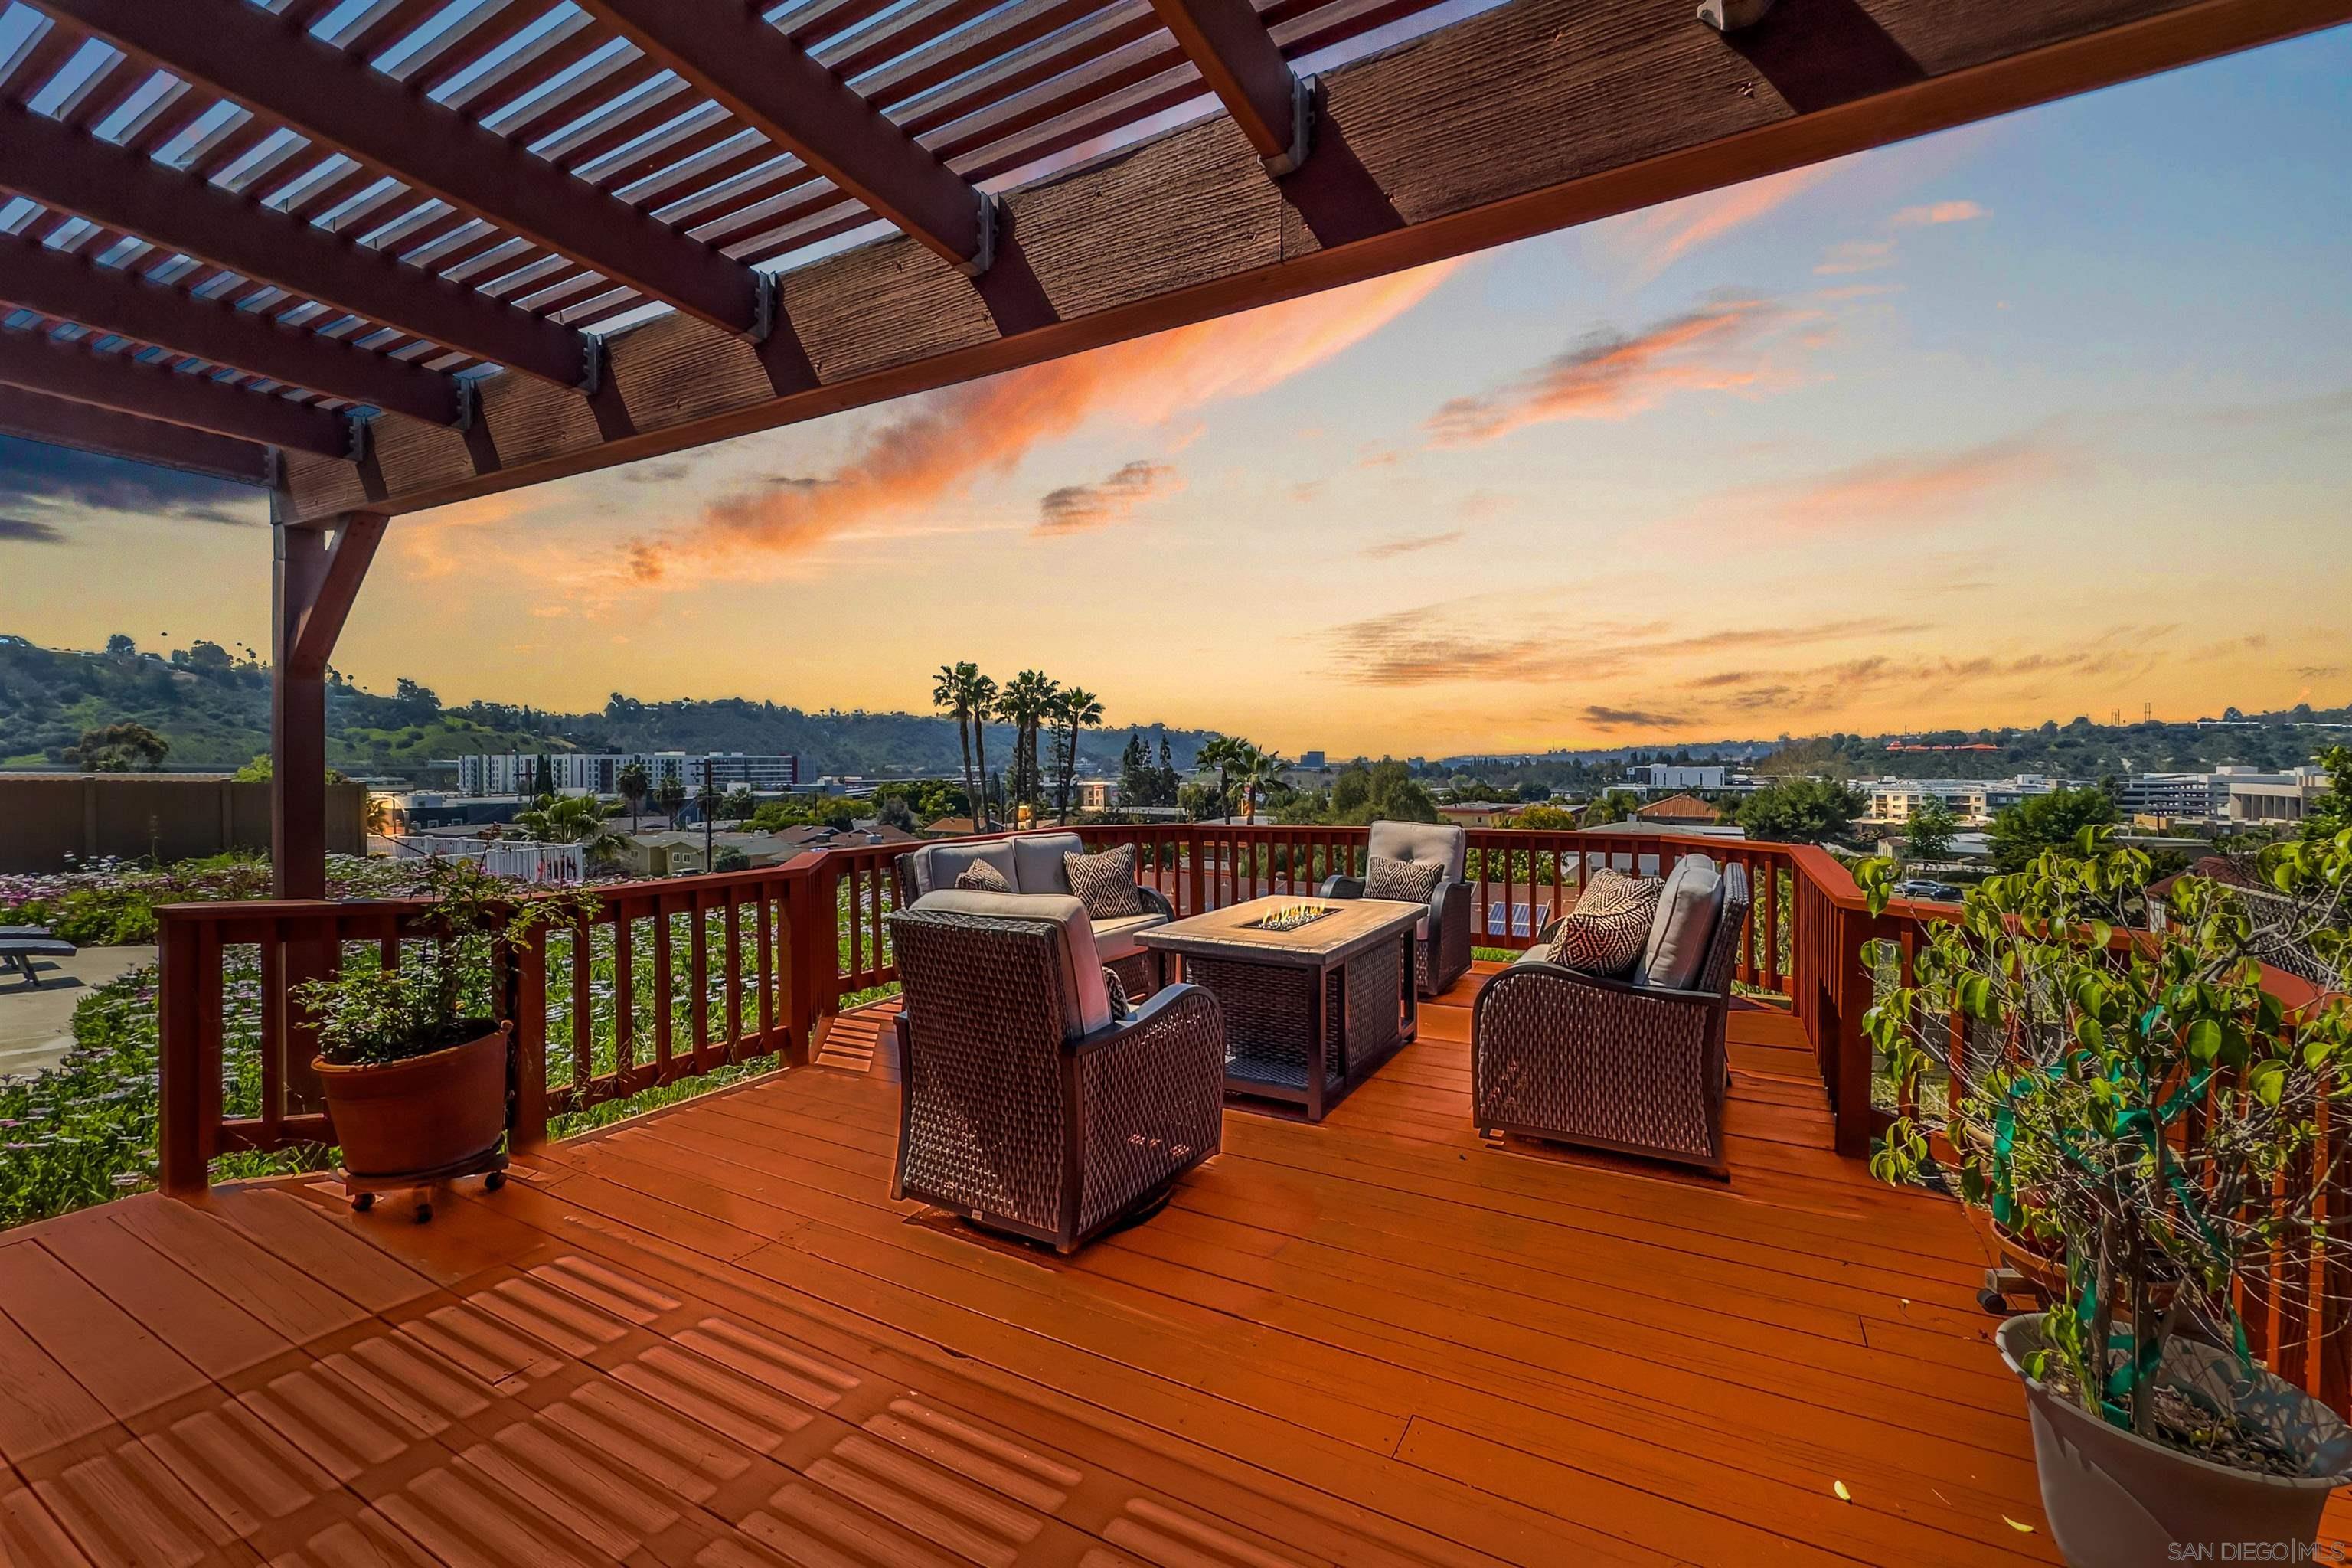 a view of a roof deck with couches and wooden floor